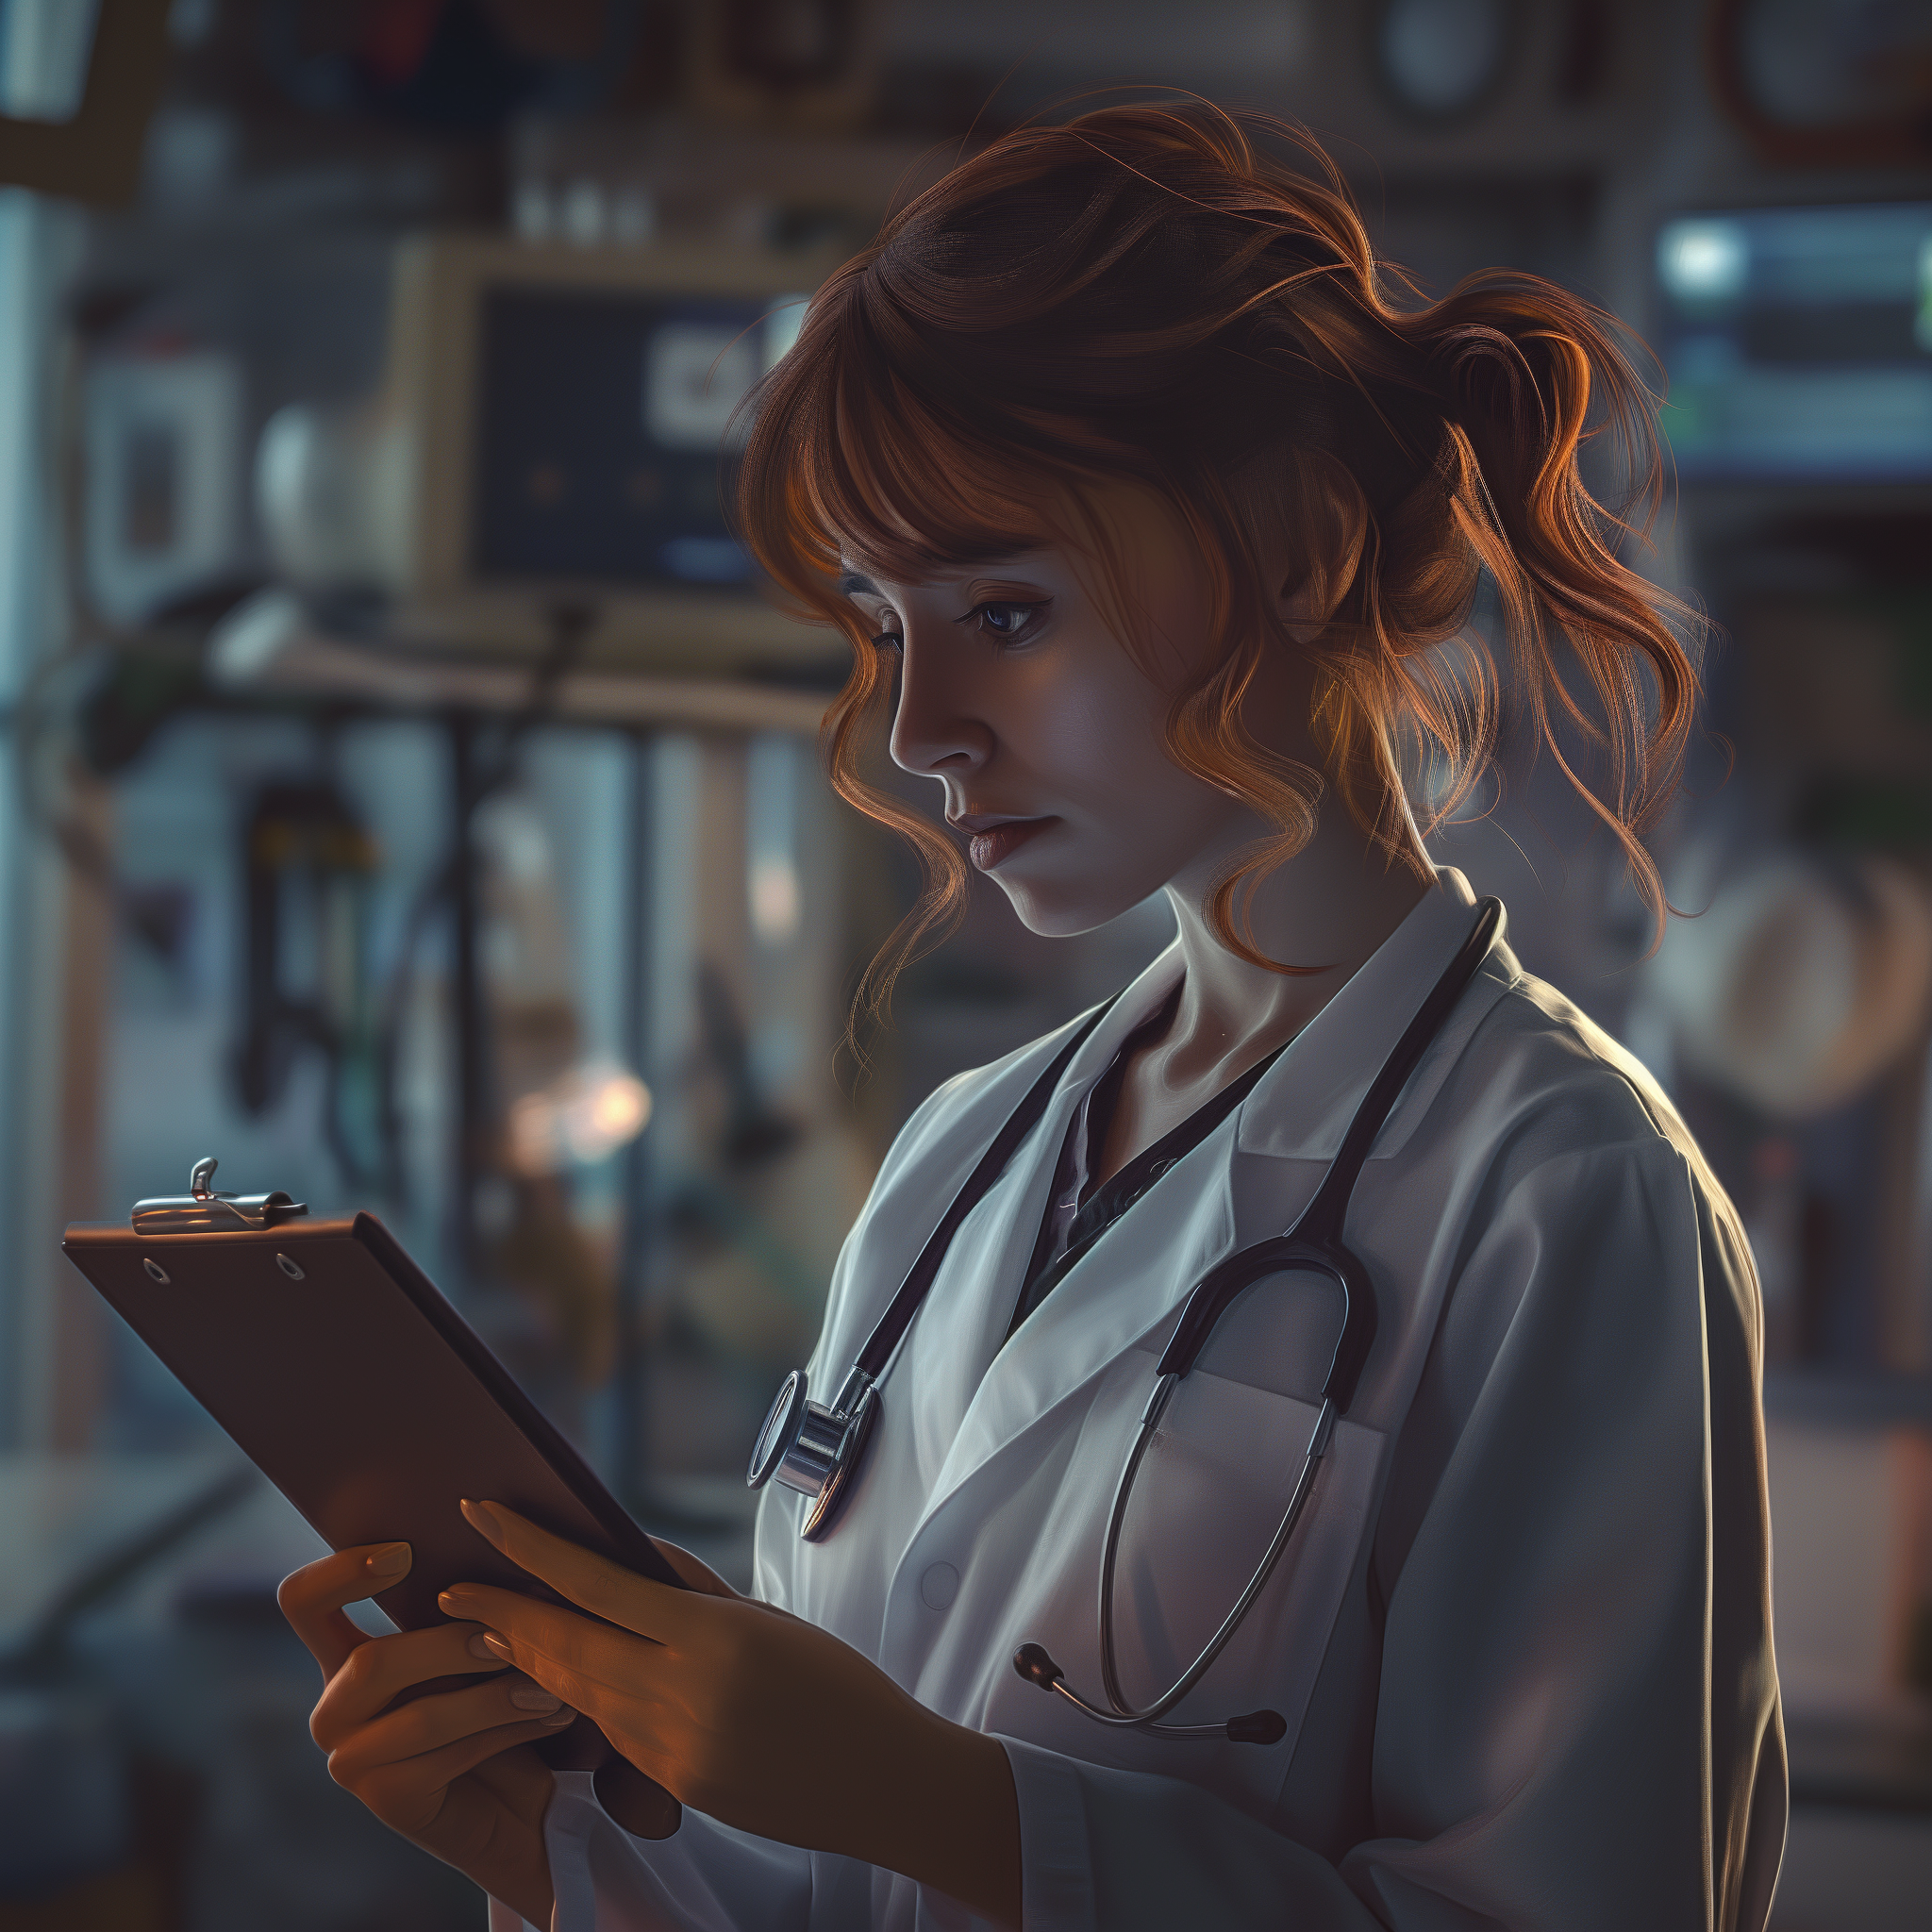 A doctor lost in her work | Source: Midjourney